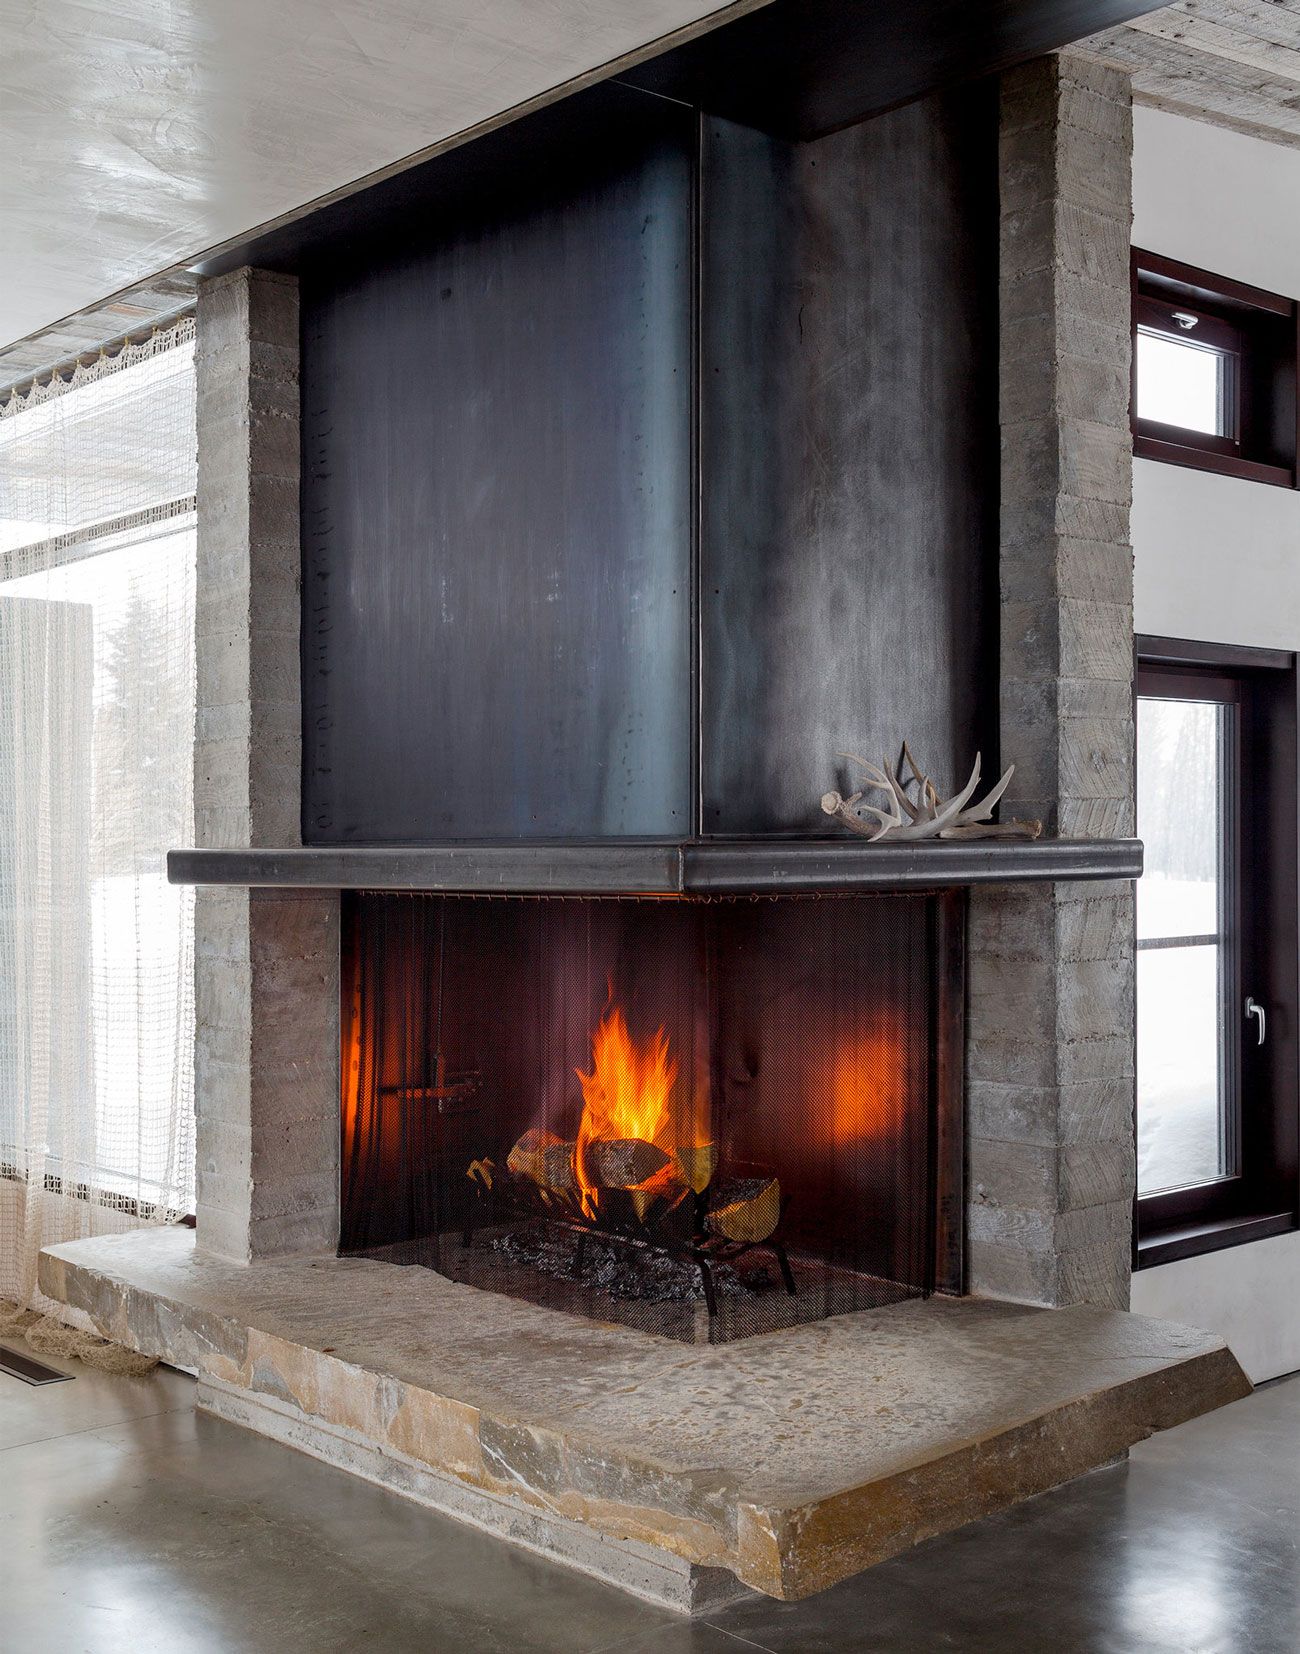 Steel Fireplace Surround New Jh Modern by Pearson Design Group 14 so In Love with